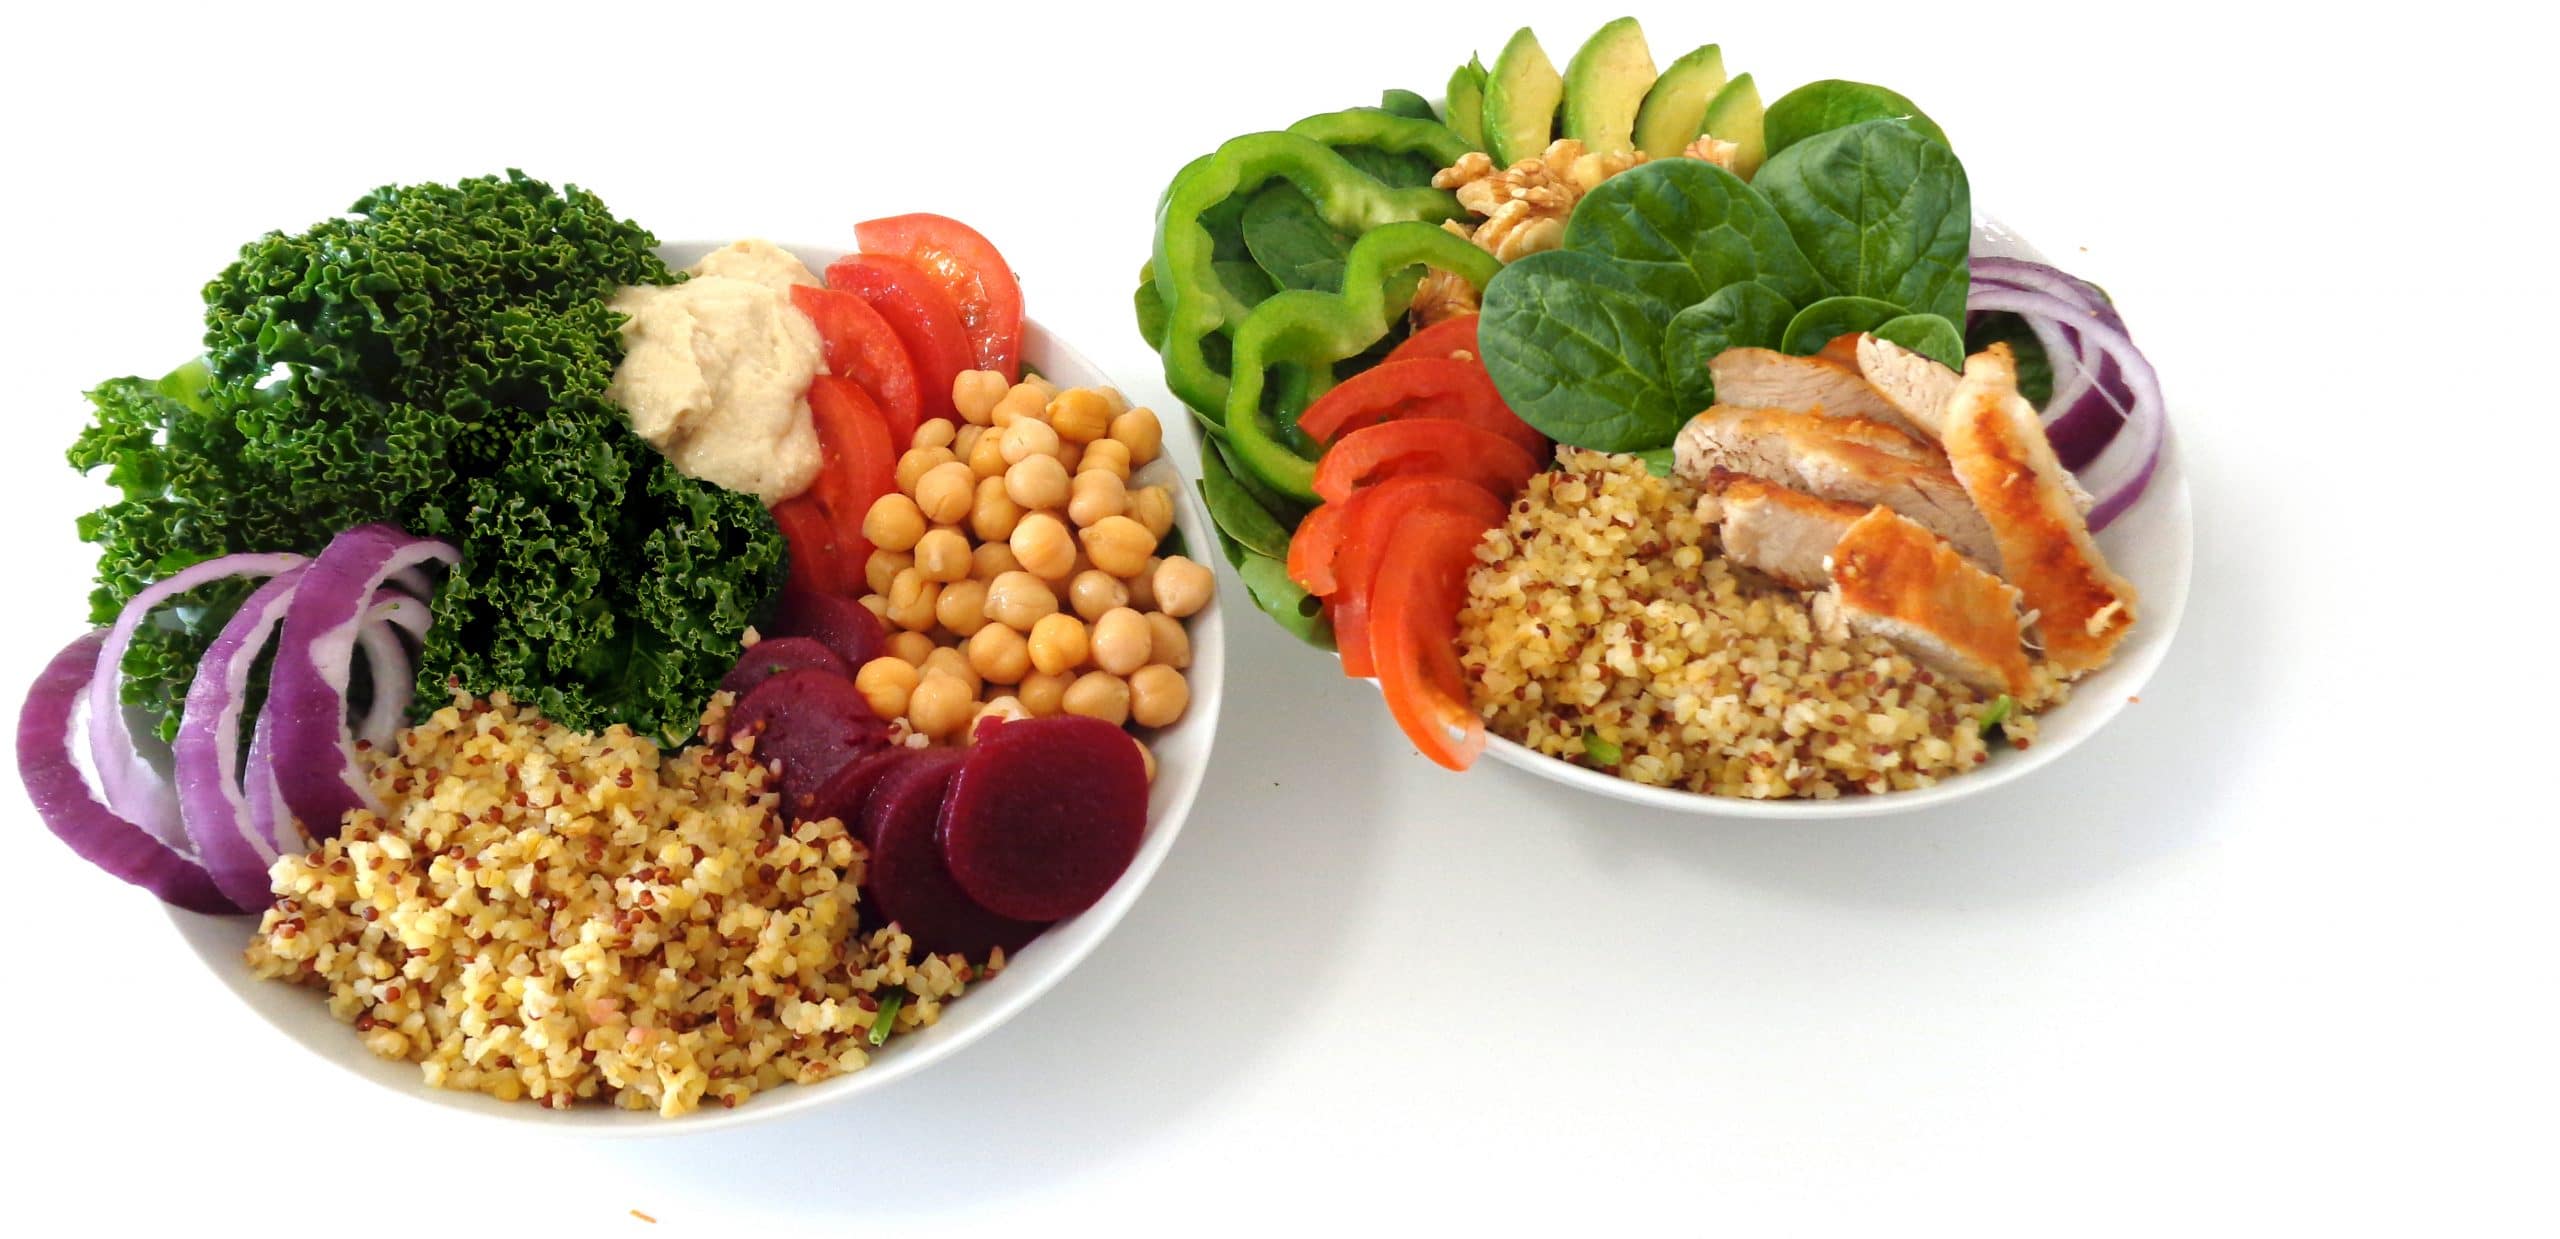 A FRESH healthy fast food option, the fresh cafe protein power bowl